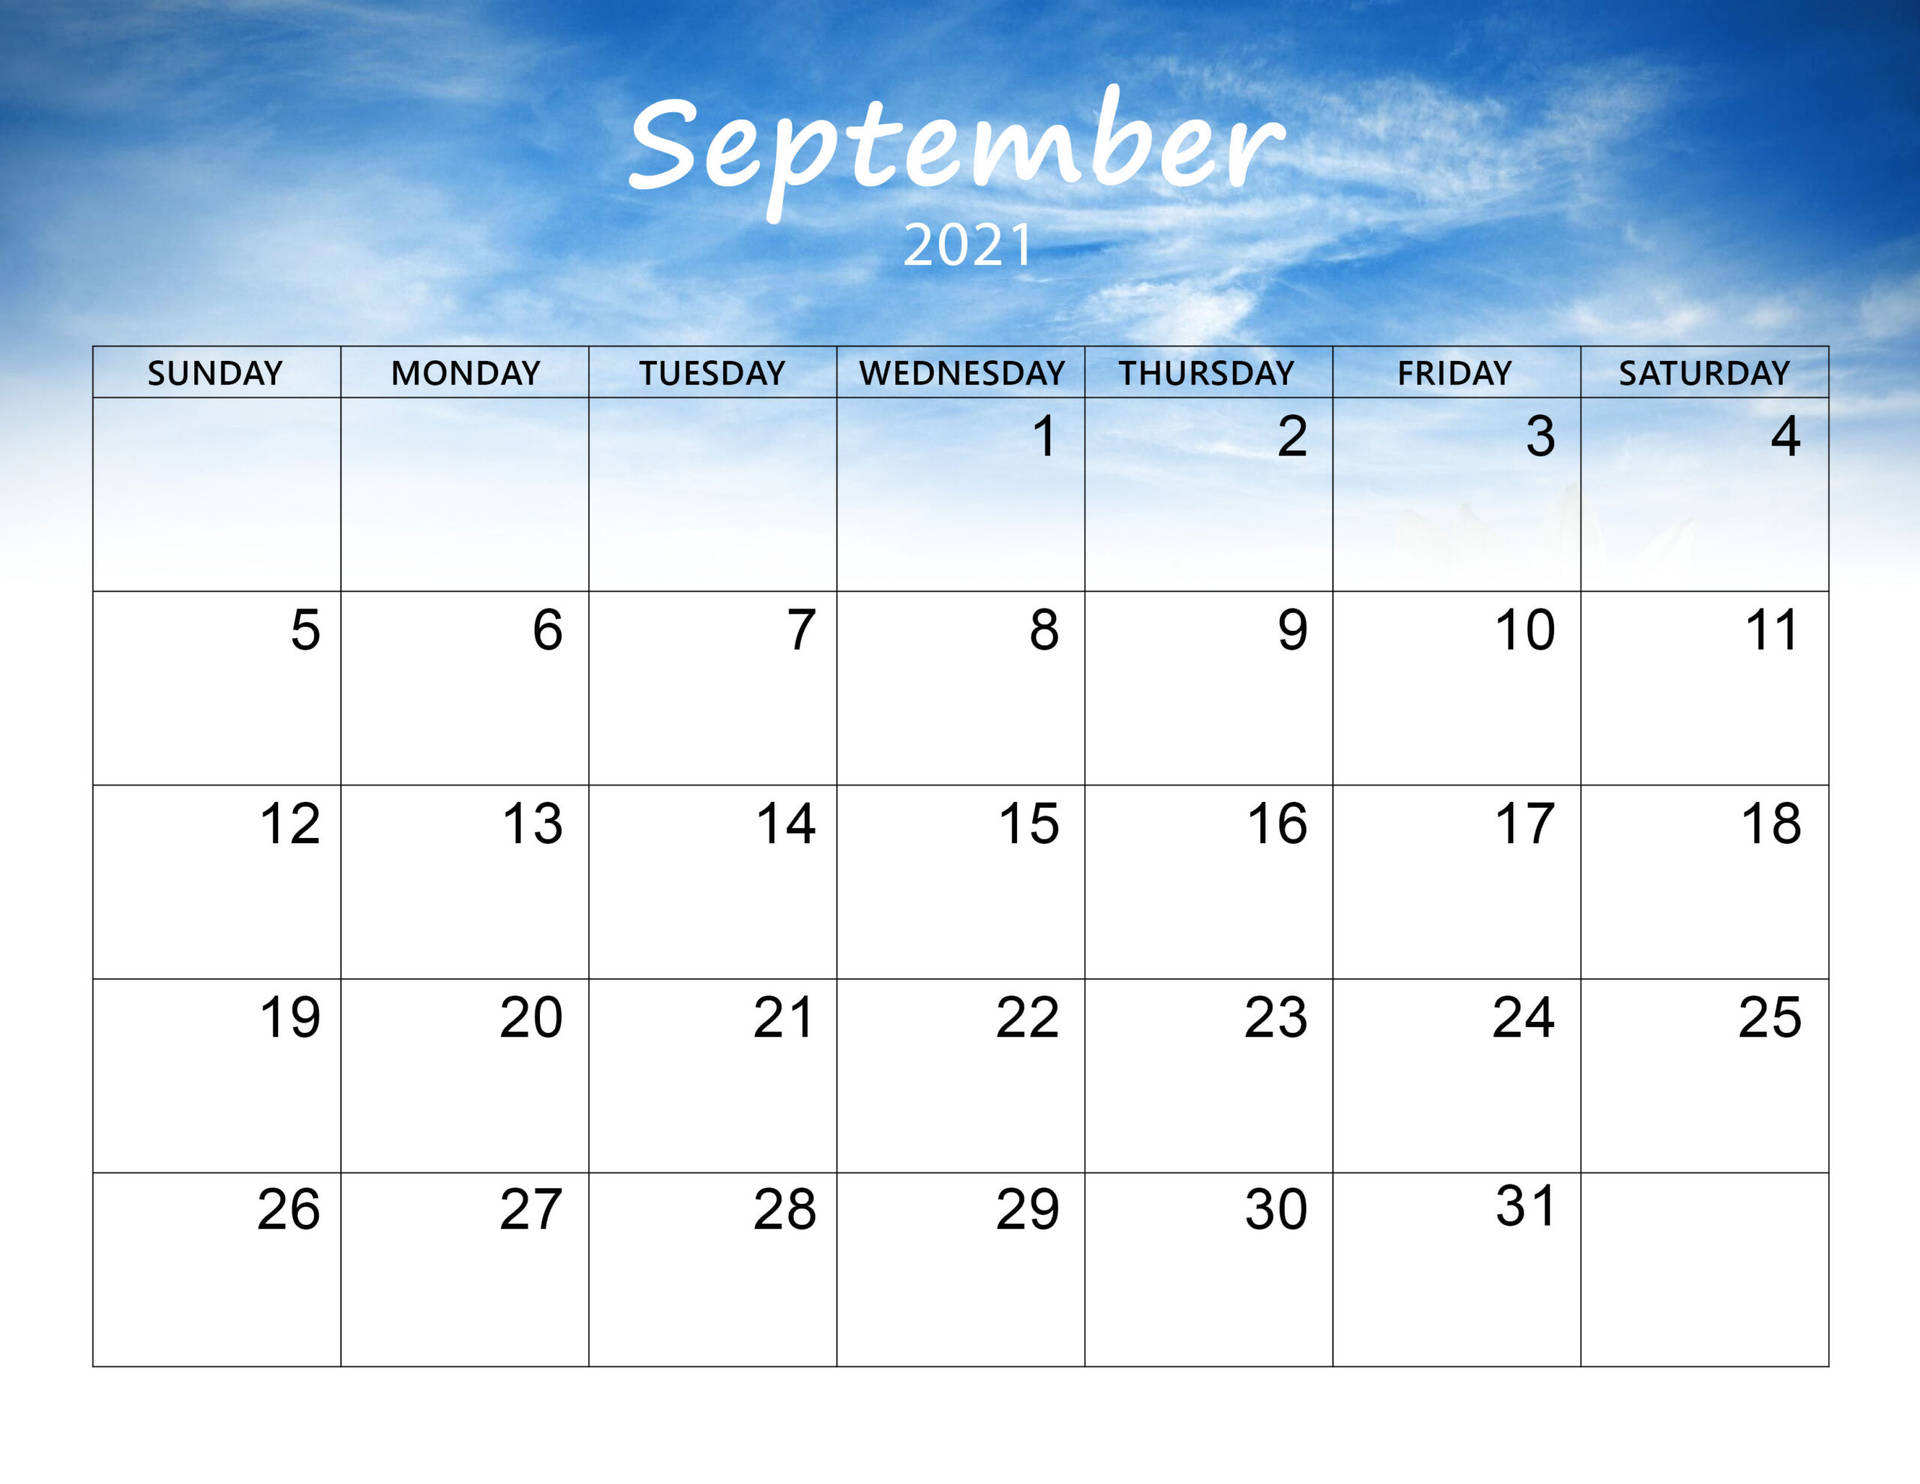 Make Plans And Hit The Skies With September's Beauty.